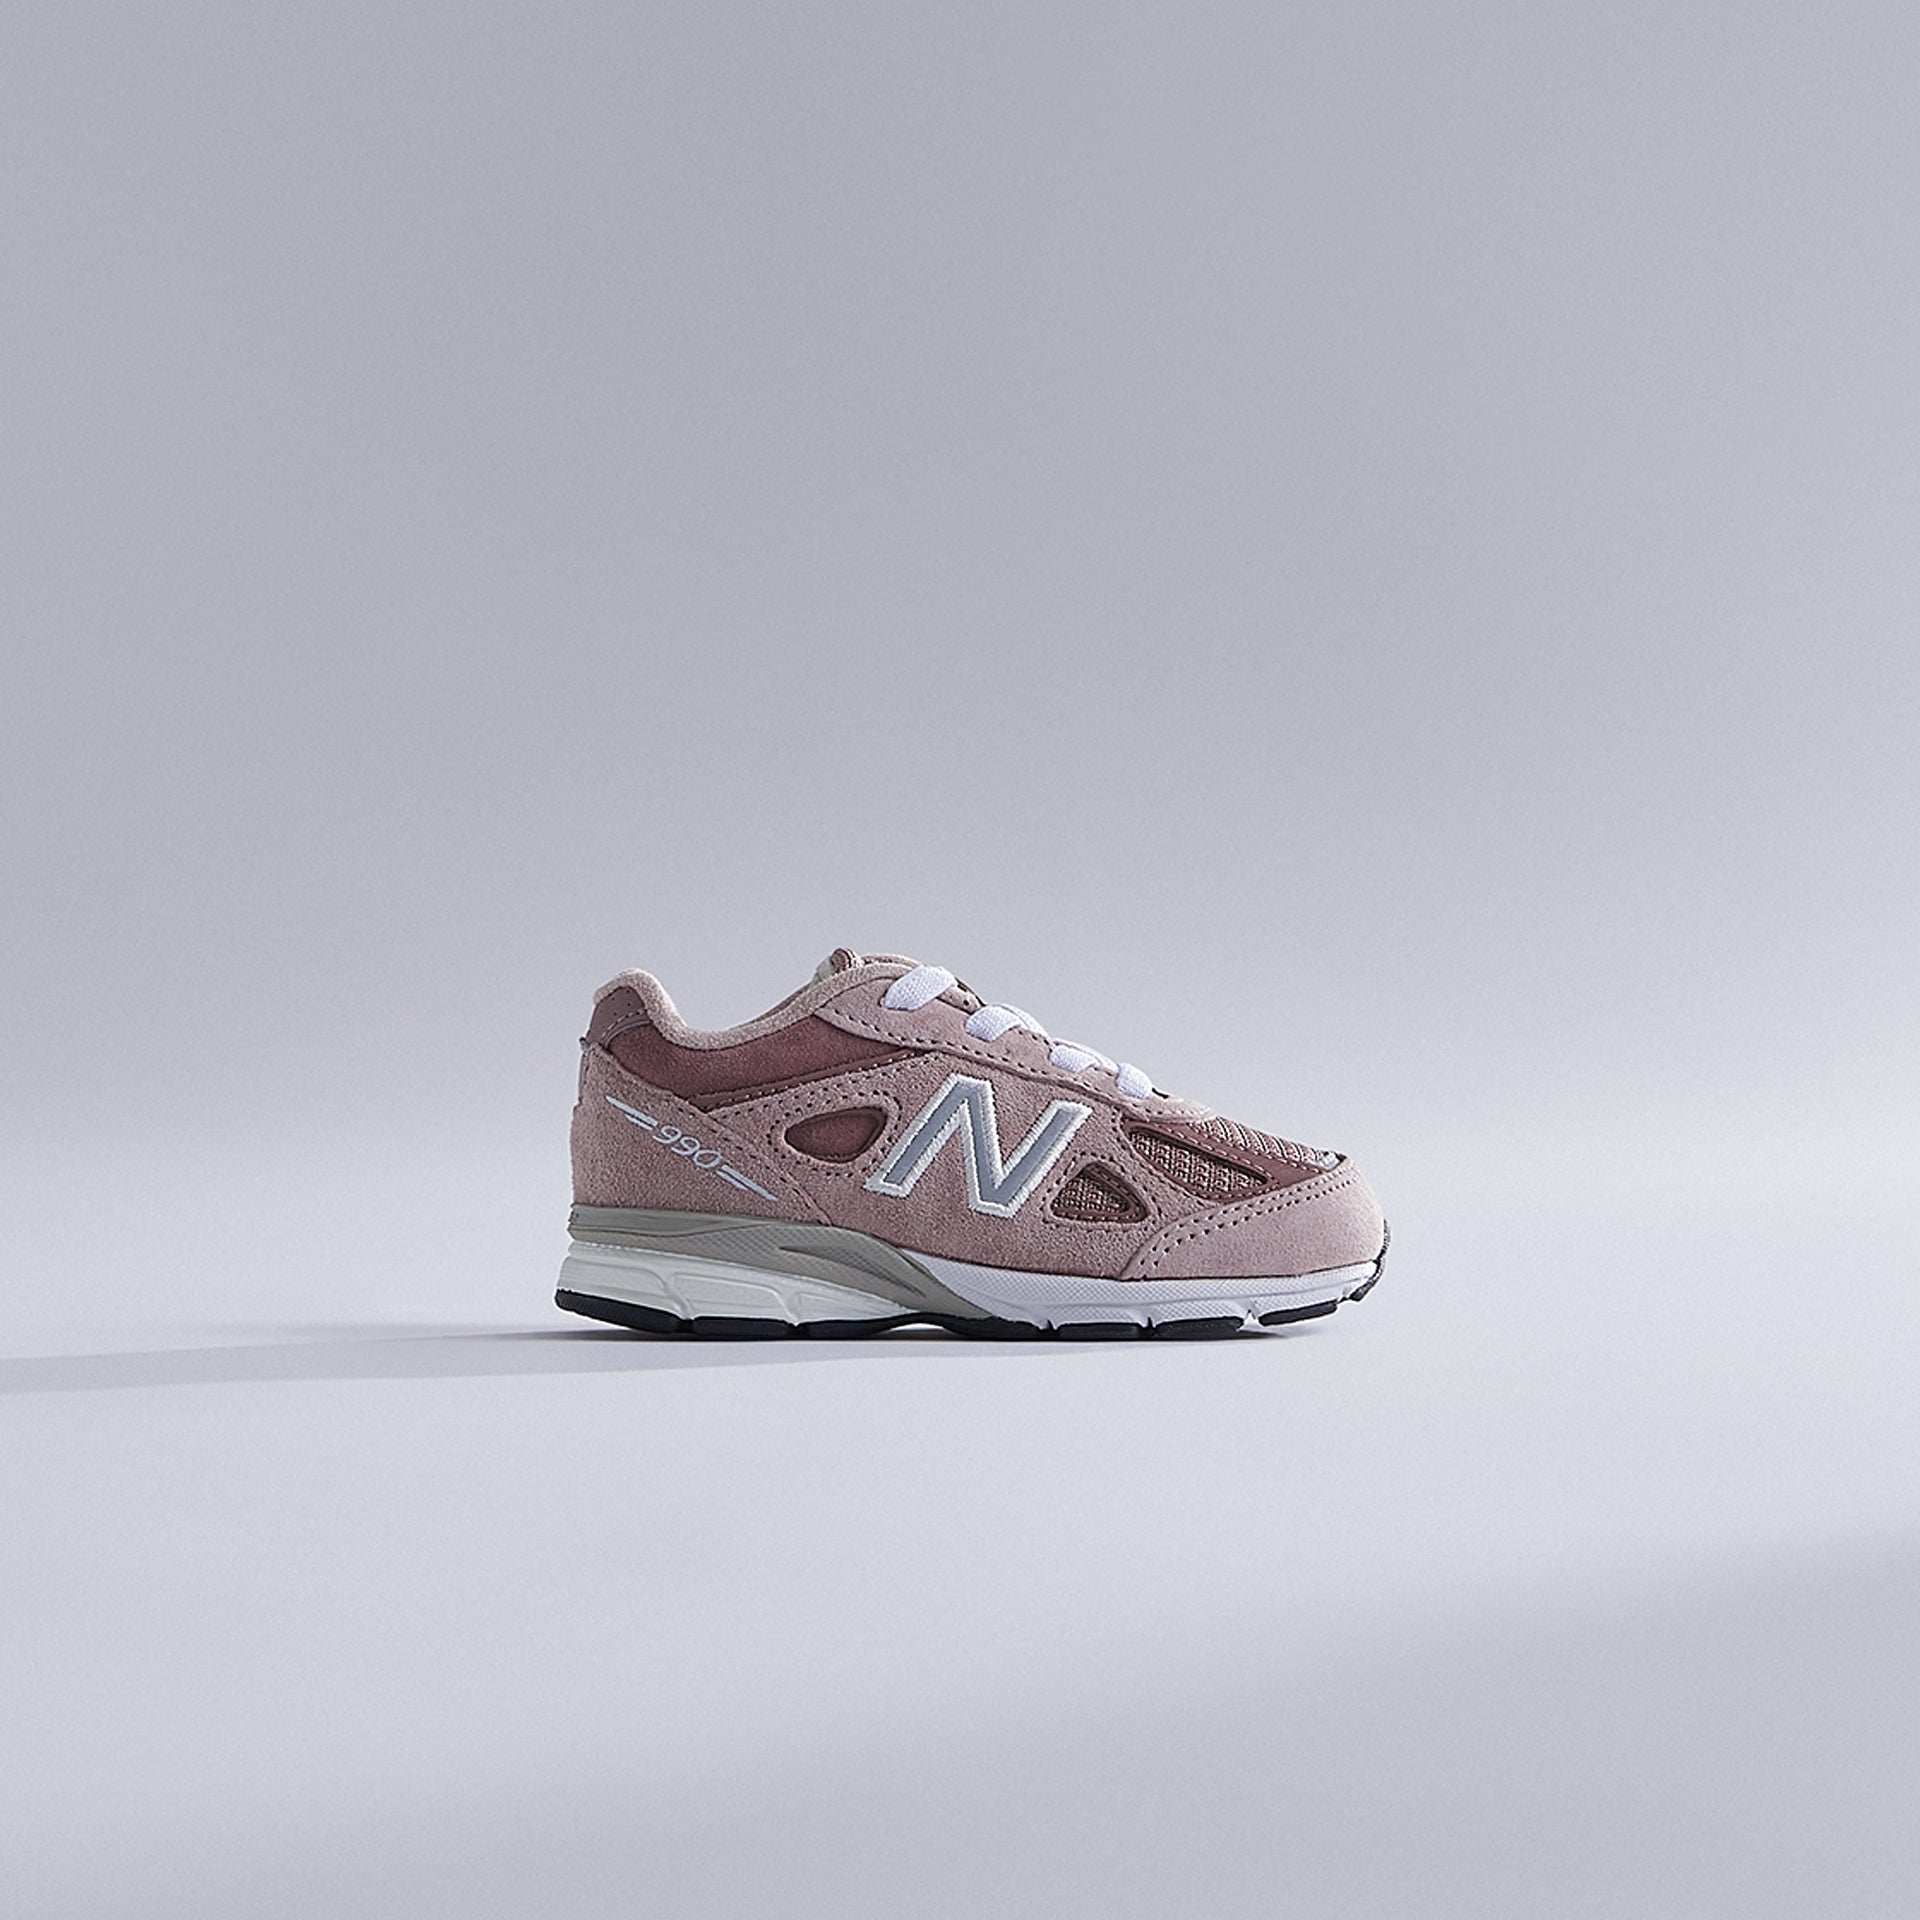 Ronnie Fieg for New Balance 990v4 Toddler - Dusty Rose